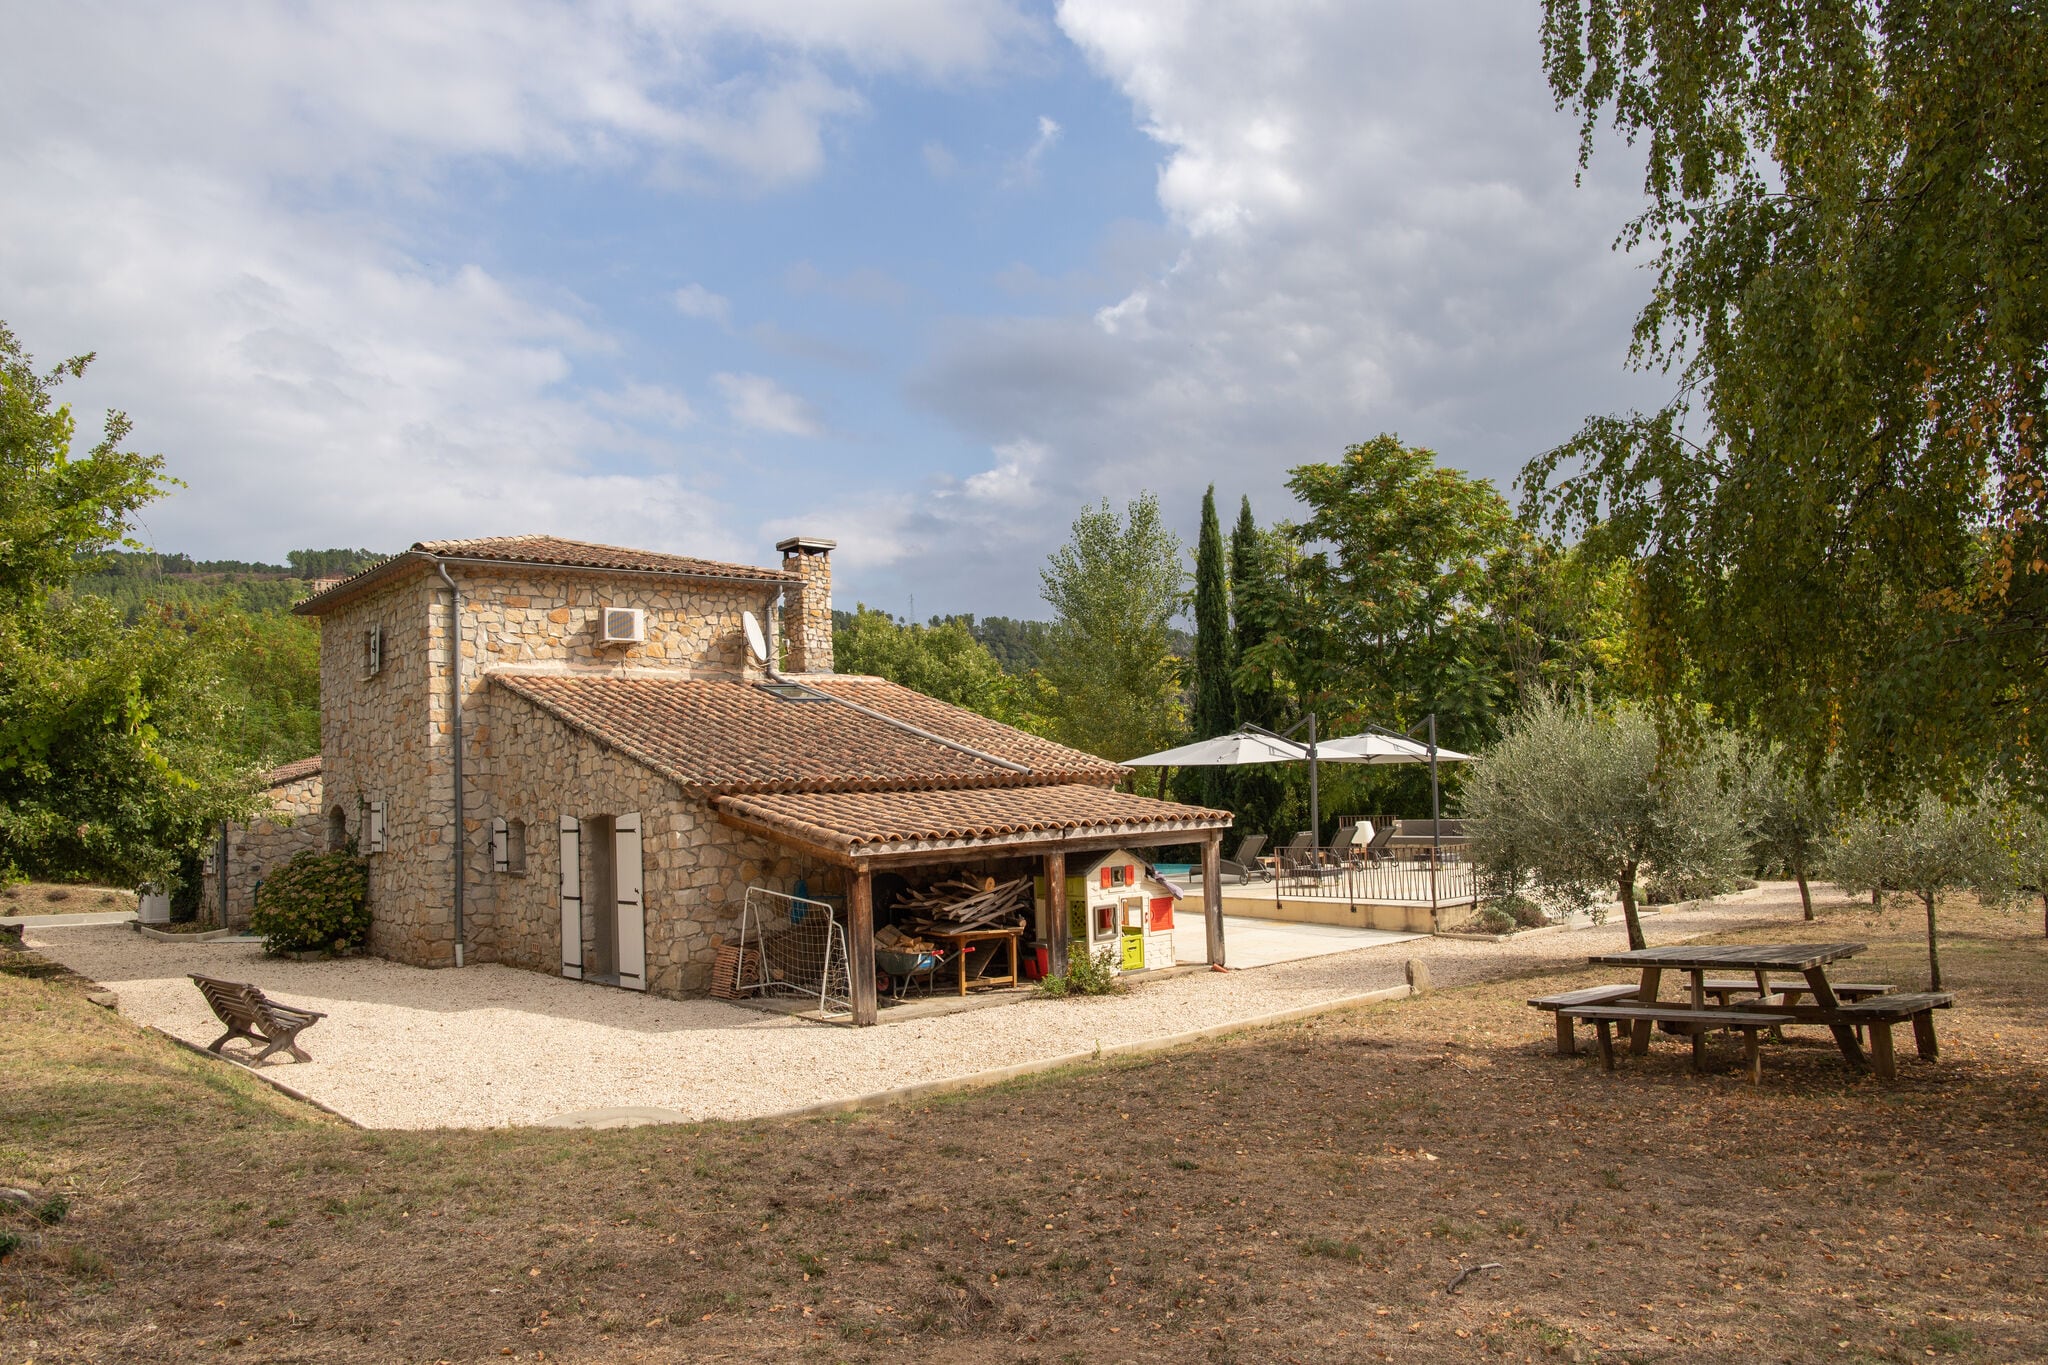 Lively Villa in Les Salelles with Private Swimmiing Pool